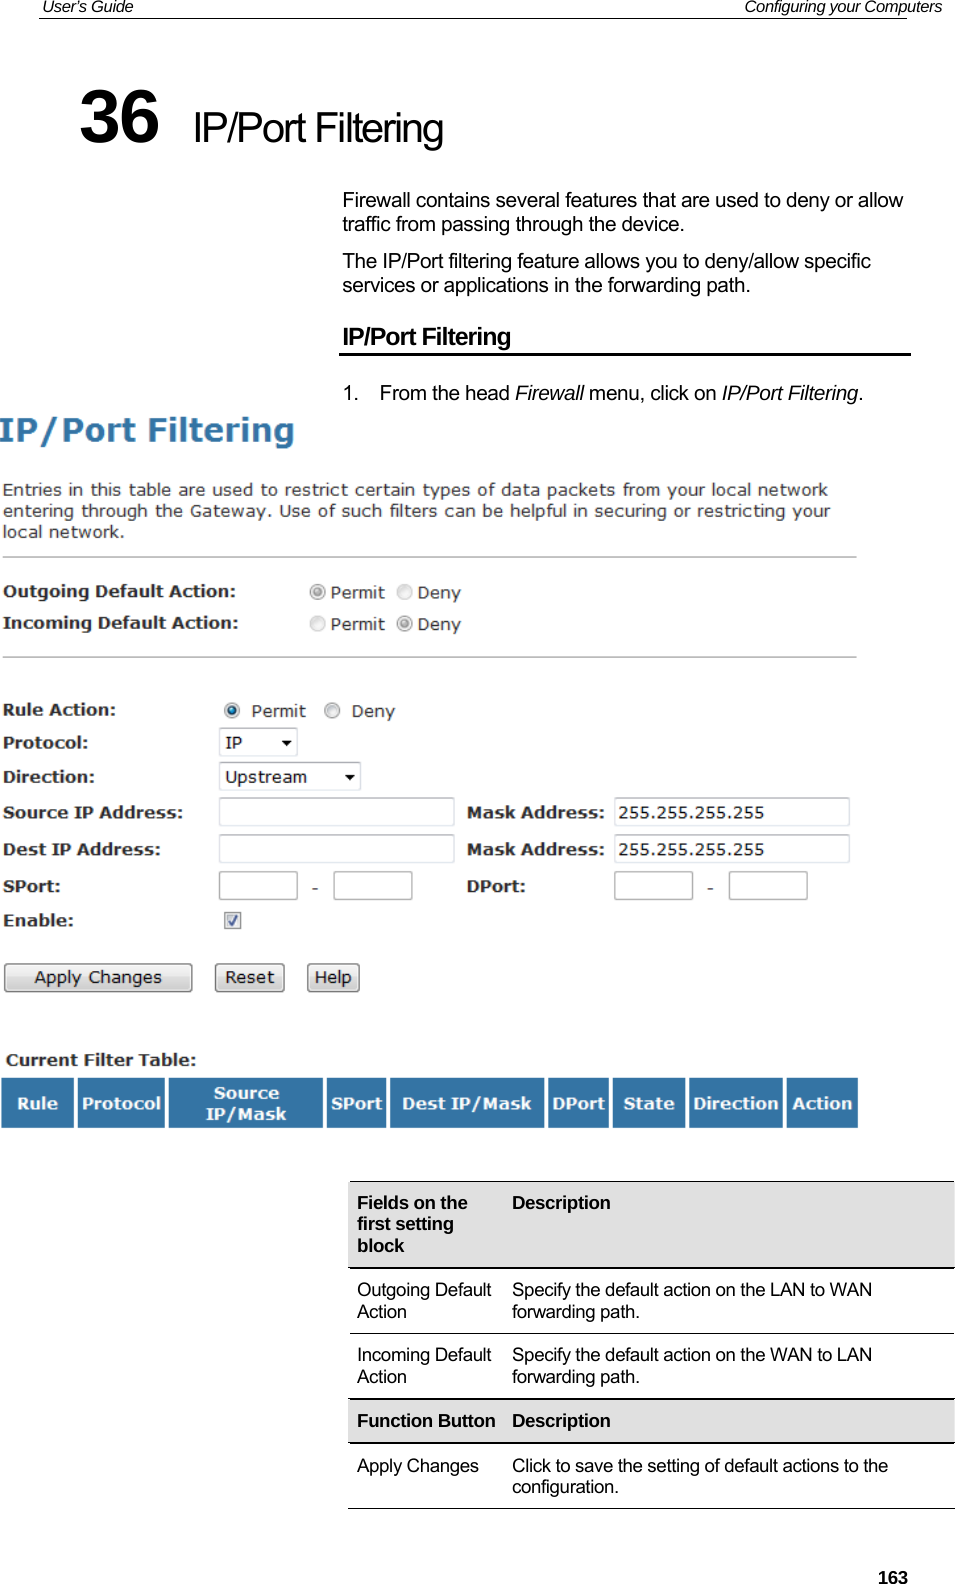 User’s Guide   Configuring your Computers 36  IP/Port Filtering Firewall contains several features that are used to deny or allow traffic from passing through the device. The IP/Port filtering feature allows you to deny/allow specific services or applications in the forwarding path. IP/Port Filtering 1. From the head Firewall menu, click on IP/Port Filtering.      Fields on the first setting block Description  Outgoing Default Action Specify the default action on the LAN to WAN forwarding path. Incoming Default Action Specify the default action on the WAN to LAN forwarding path.      Function Button Description  Apply Changes  Click to save the setting of default actions to the configuration.  163